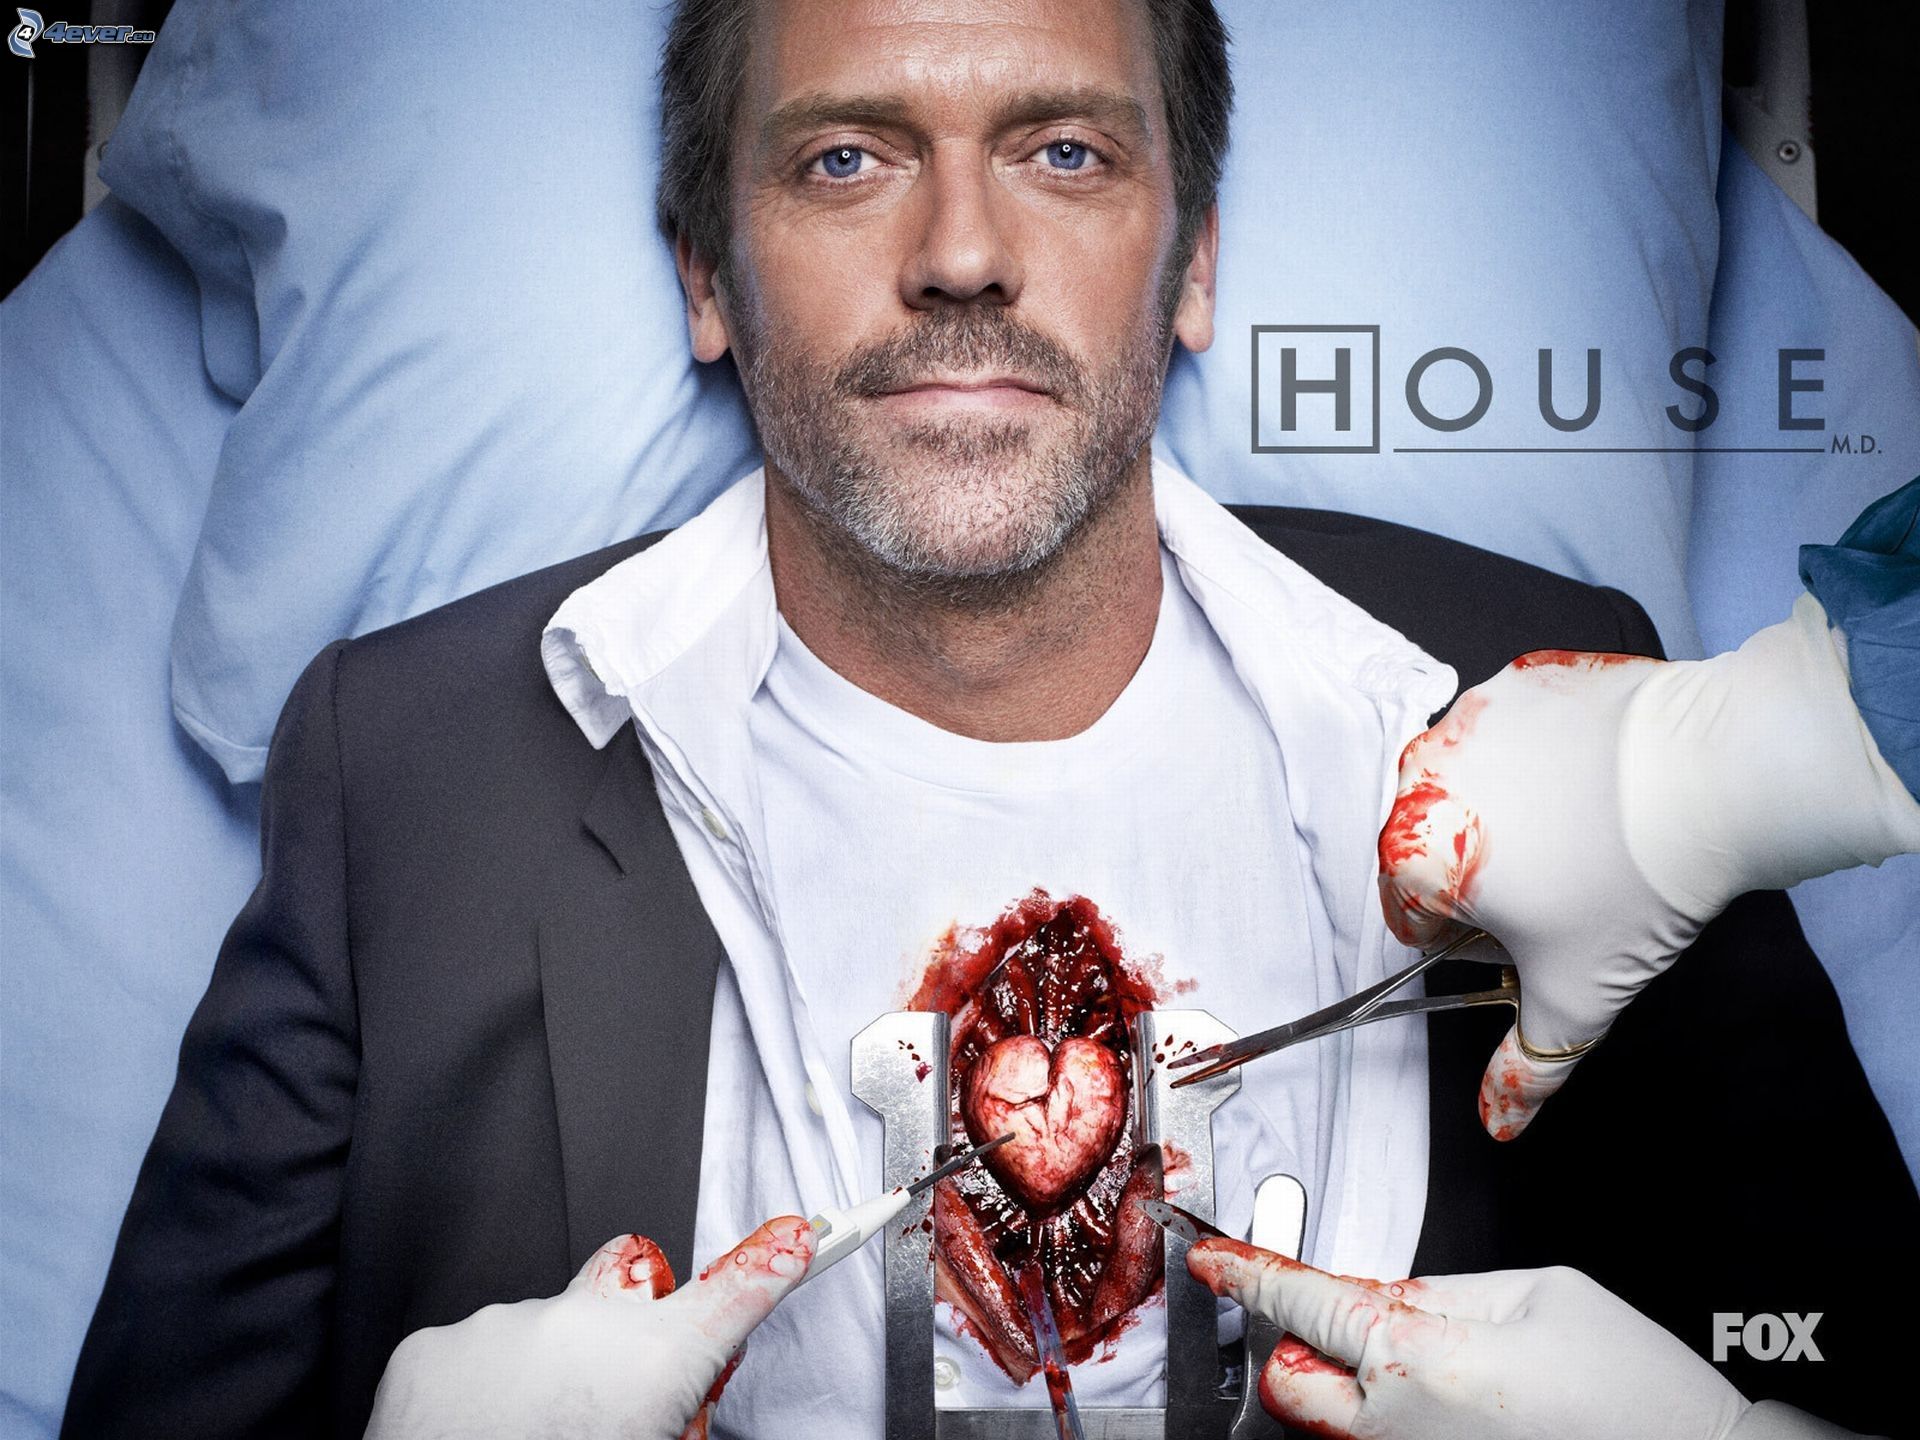 http://4everstatic.com/pictures/art/movies/dr-house,-heart-168657.jpg